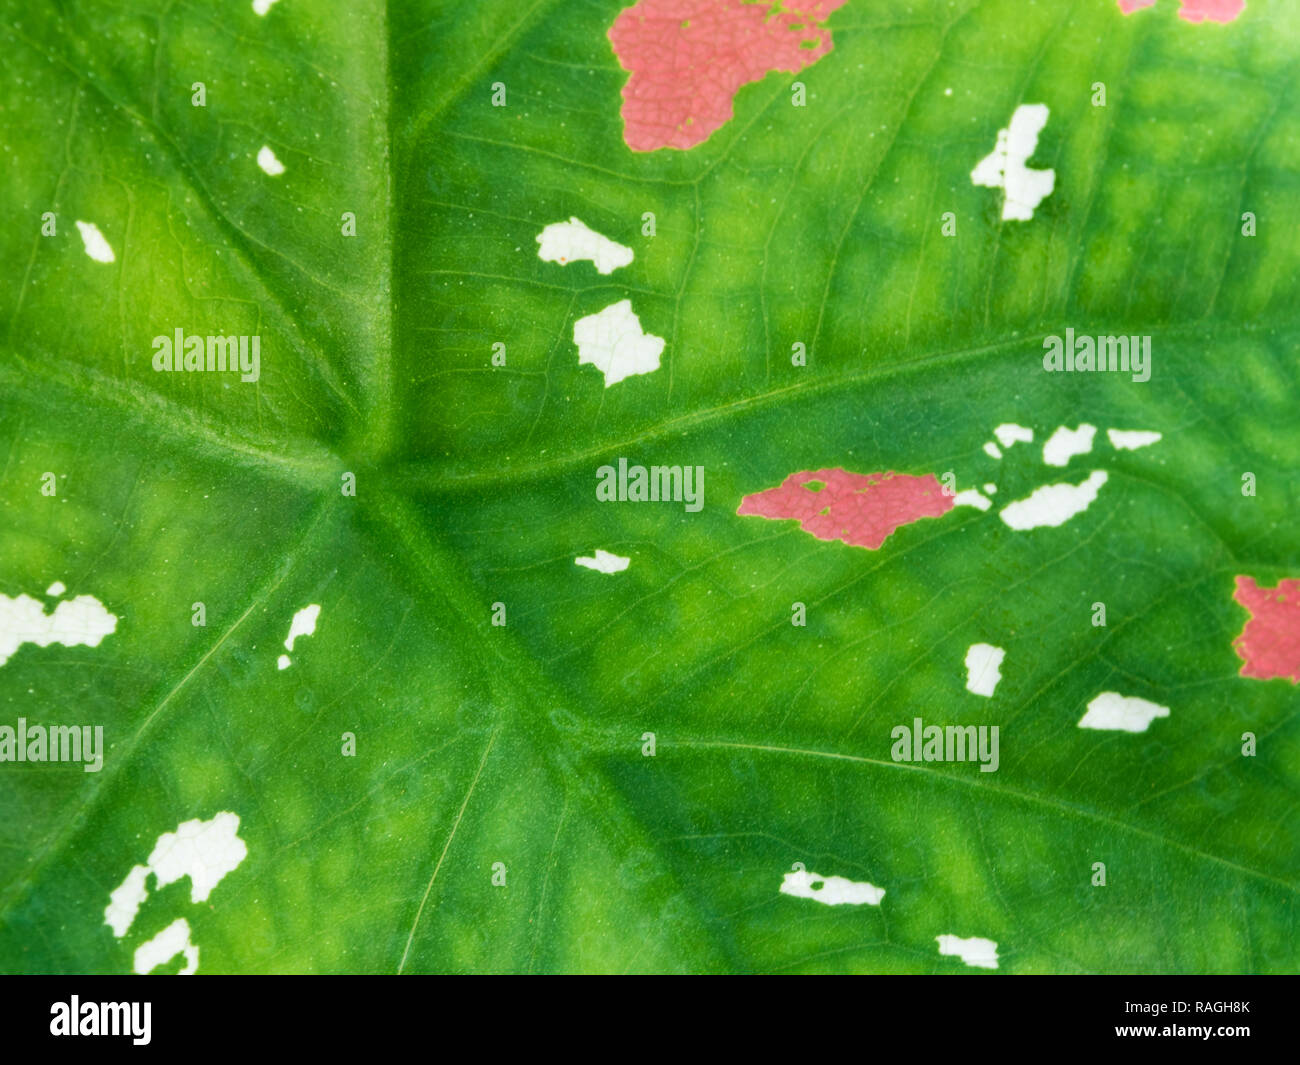 Pink and white freckles on green surface of Caladium Bicolour leaf Stock Photo